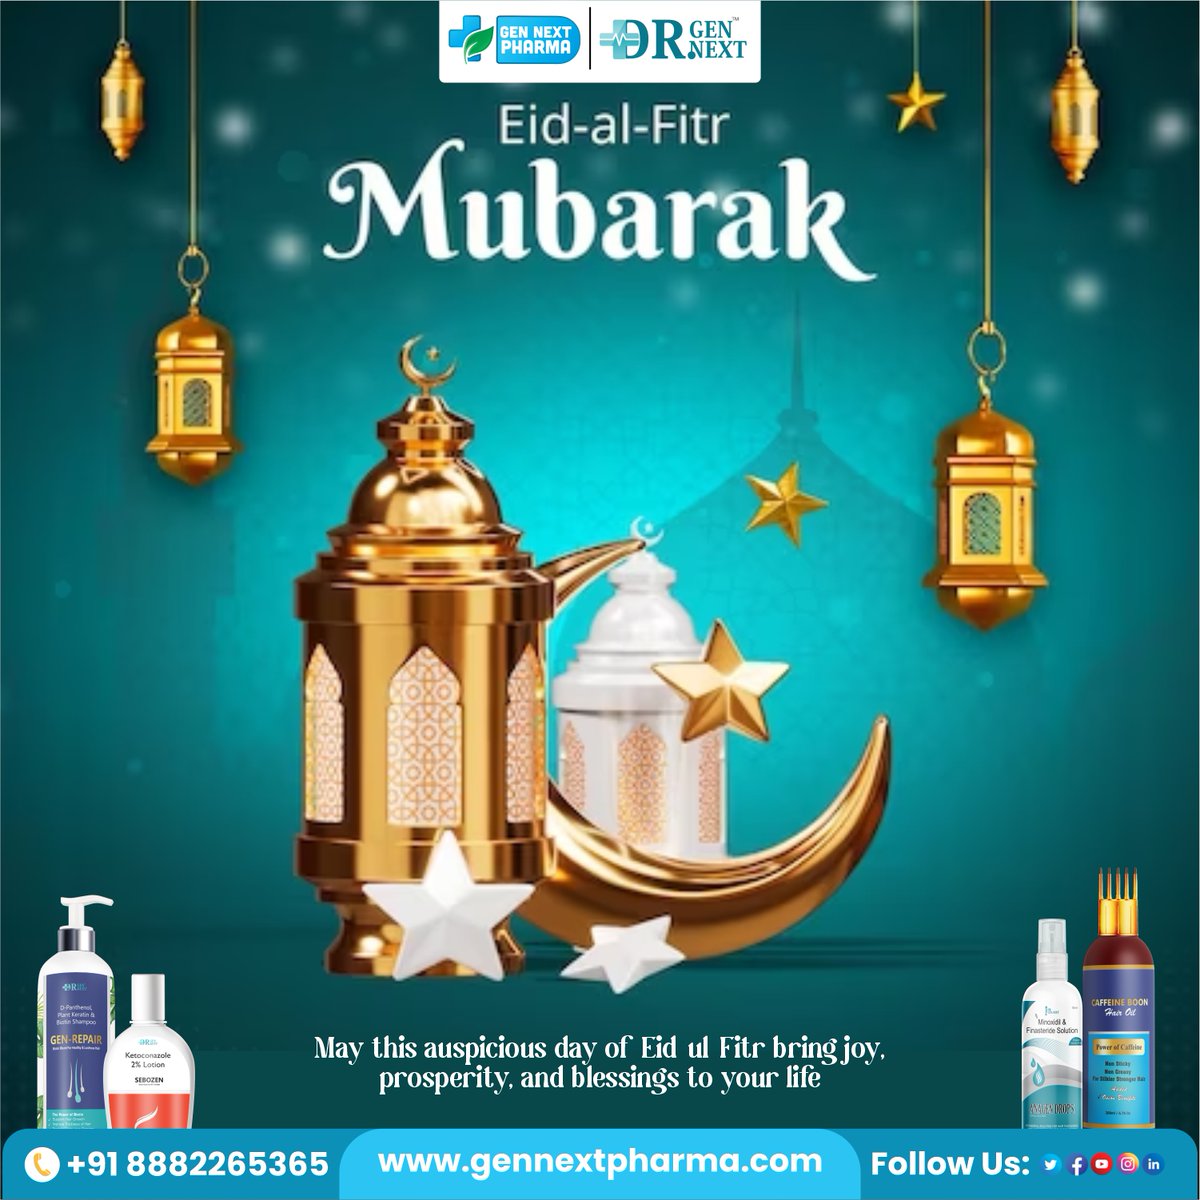 'Eid ul-Fitr Mubarak from GenNext Pharma! 🌙✨ May this joyous occasion bring peace, happiness, and Wishing you and your family a delightful Eid filled with love, laughter, and happiness

#EidMubarak #ClinicGenNext #gennextpharma #drkunalsingh #skincare #haircare #shampoo